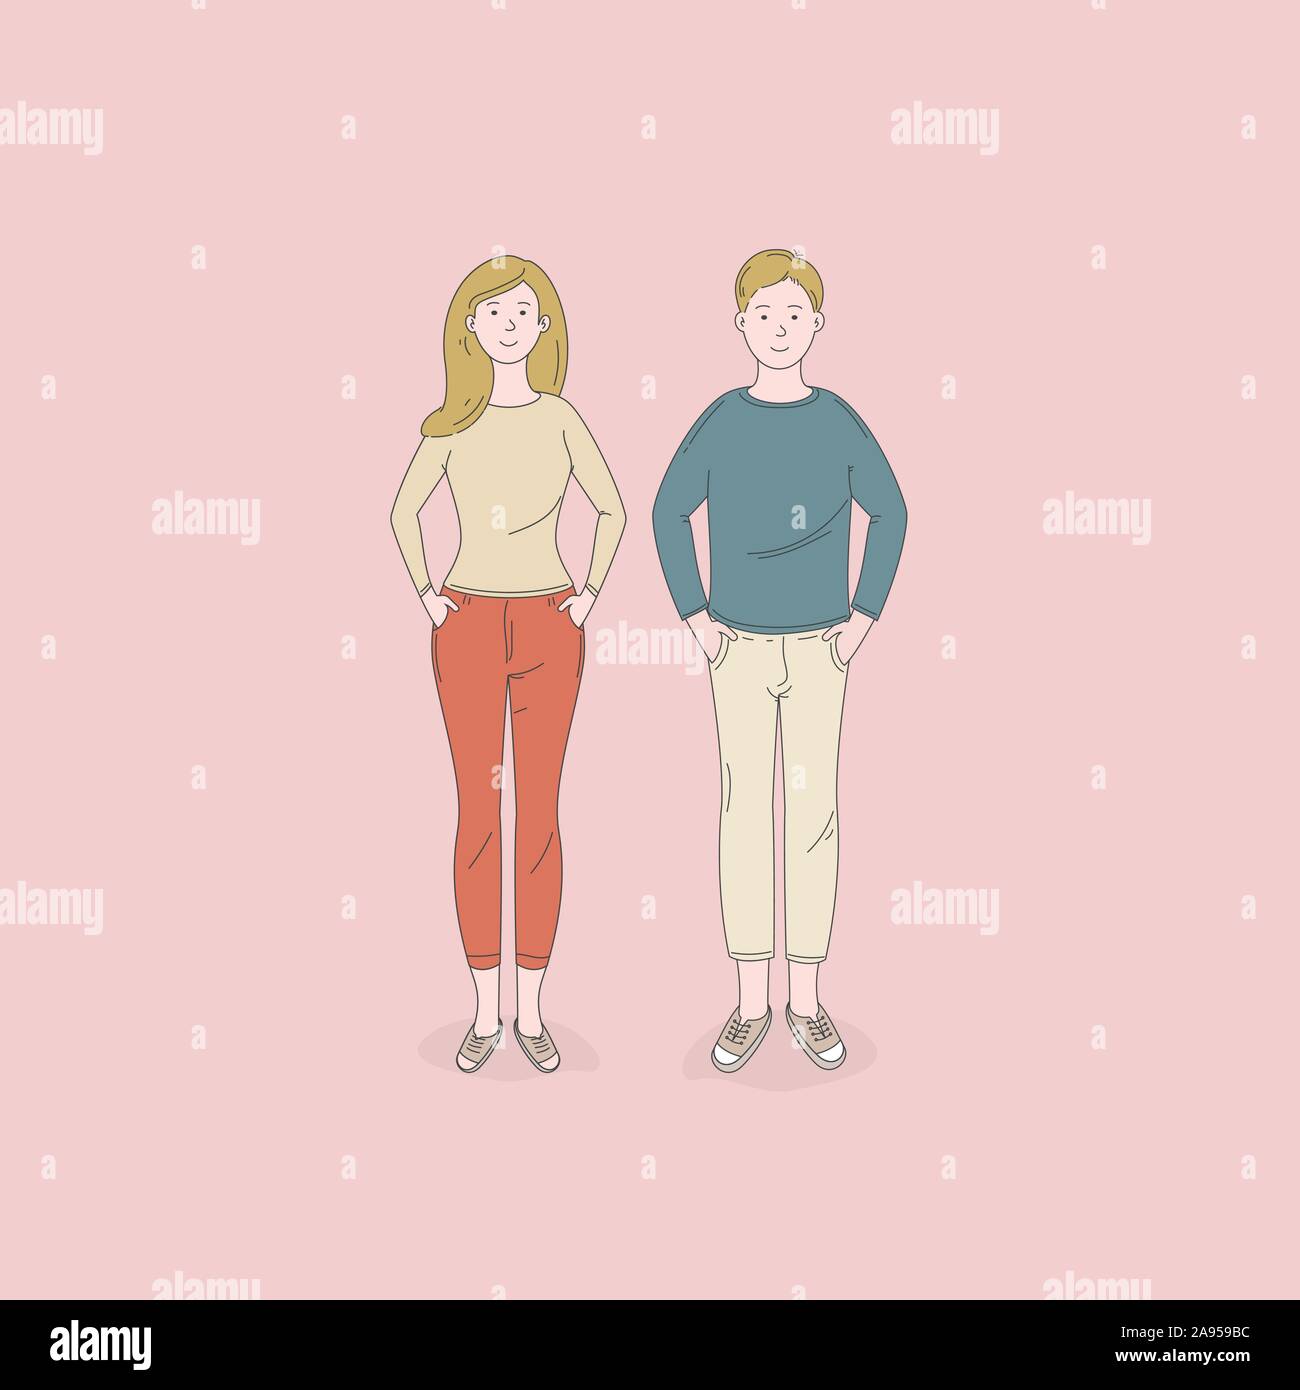 Man and woman standing poses isolated on background.Lifestyle concepts.Vector design illustrations. Stock Vector